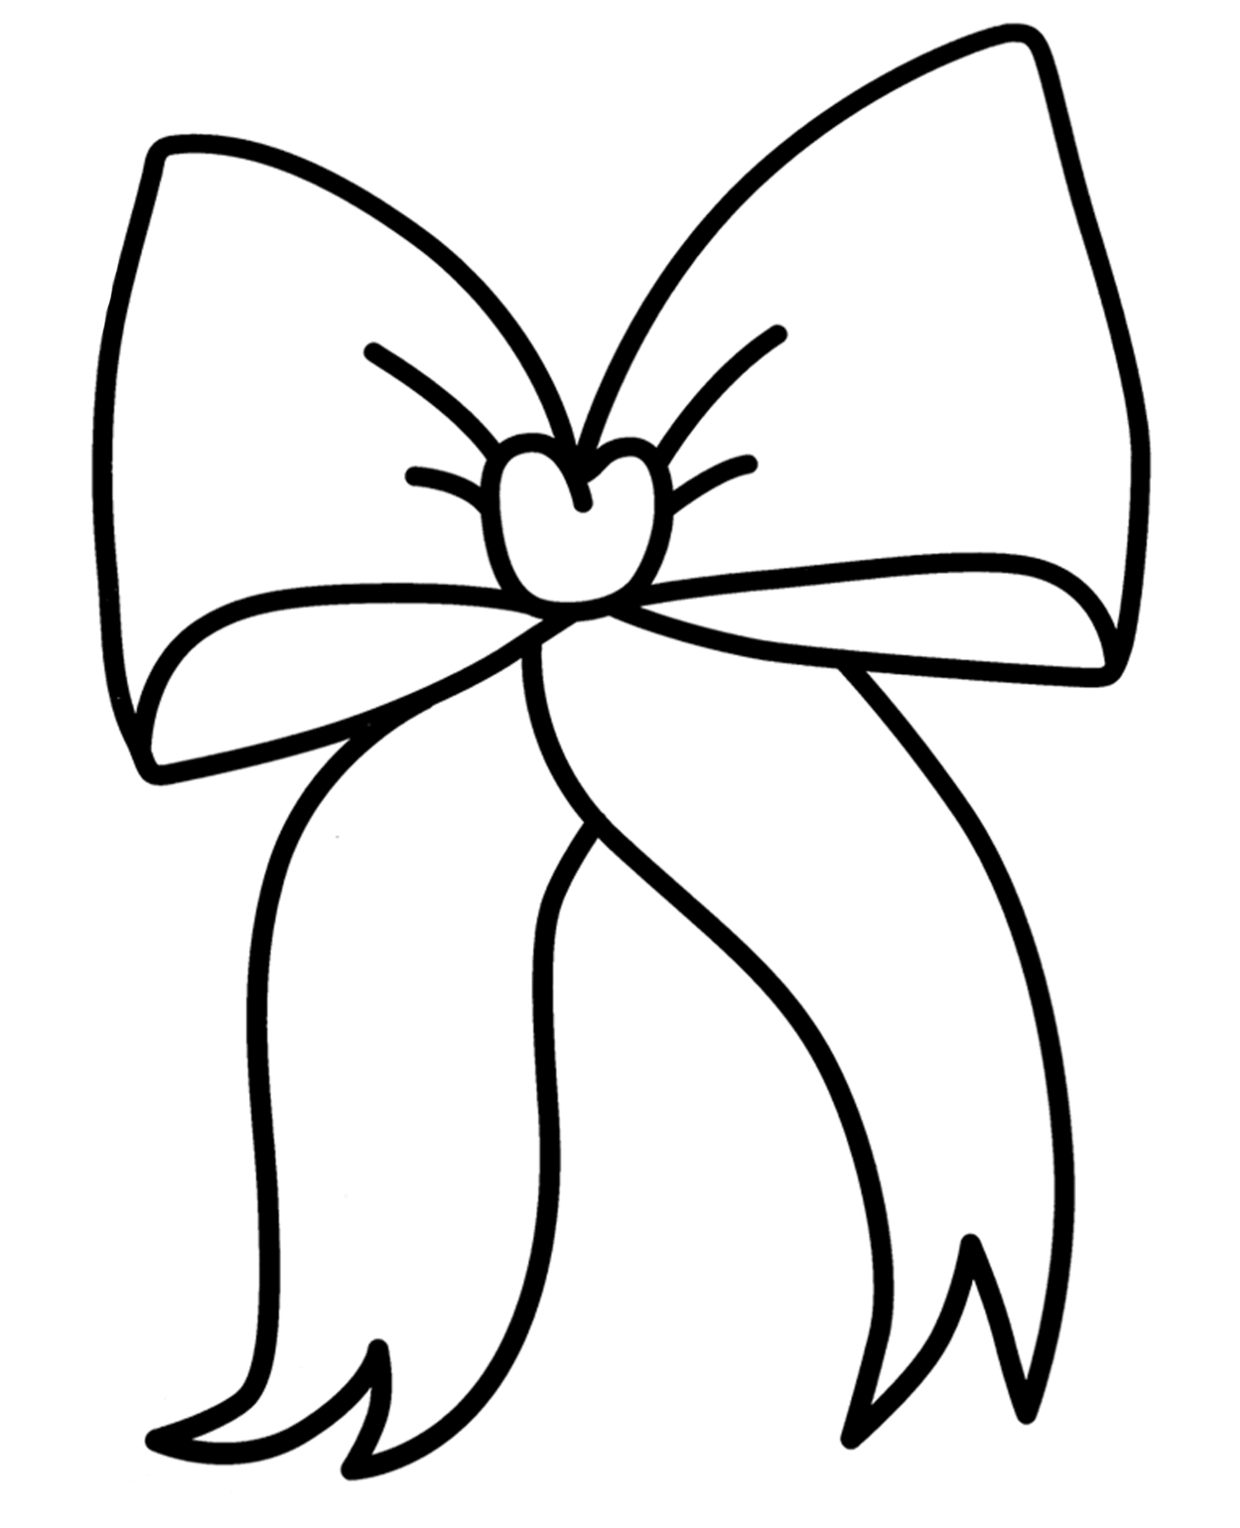 Printable Bow Coloring Pages Free For Kids And Adults